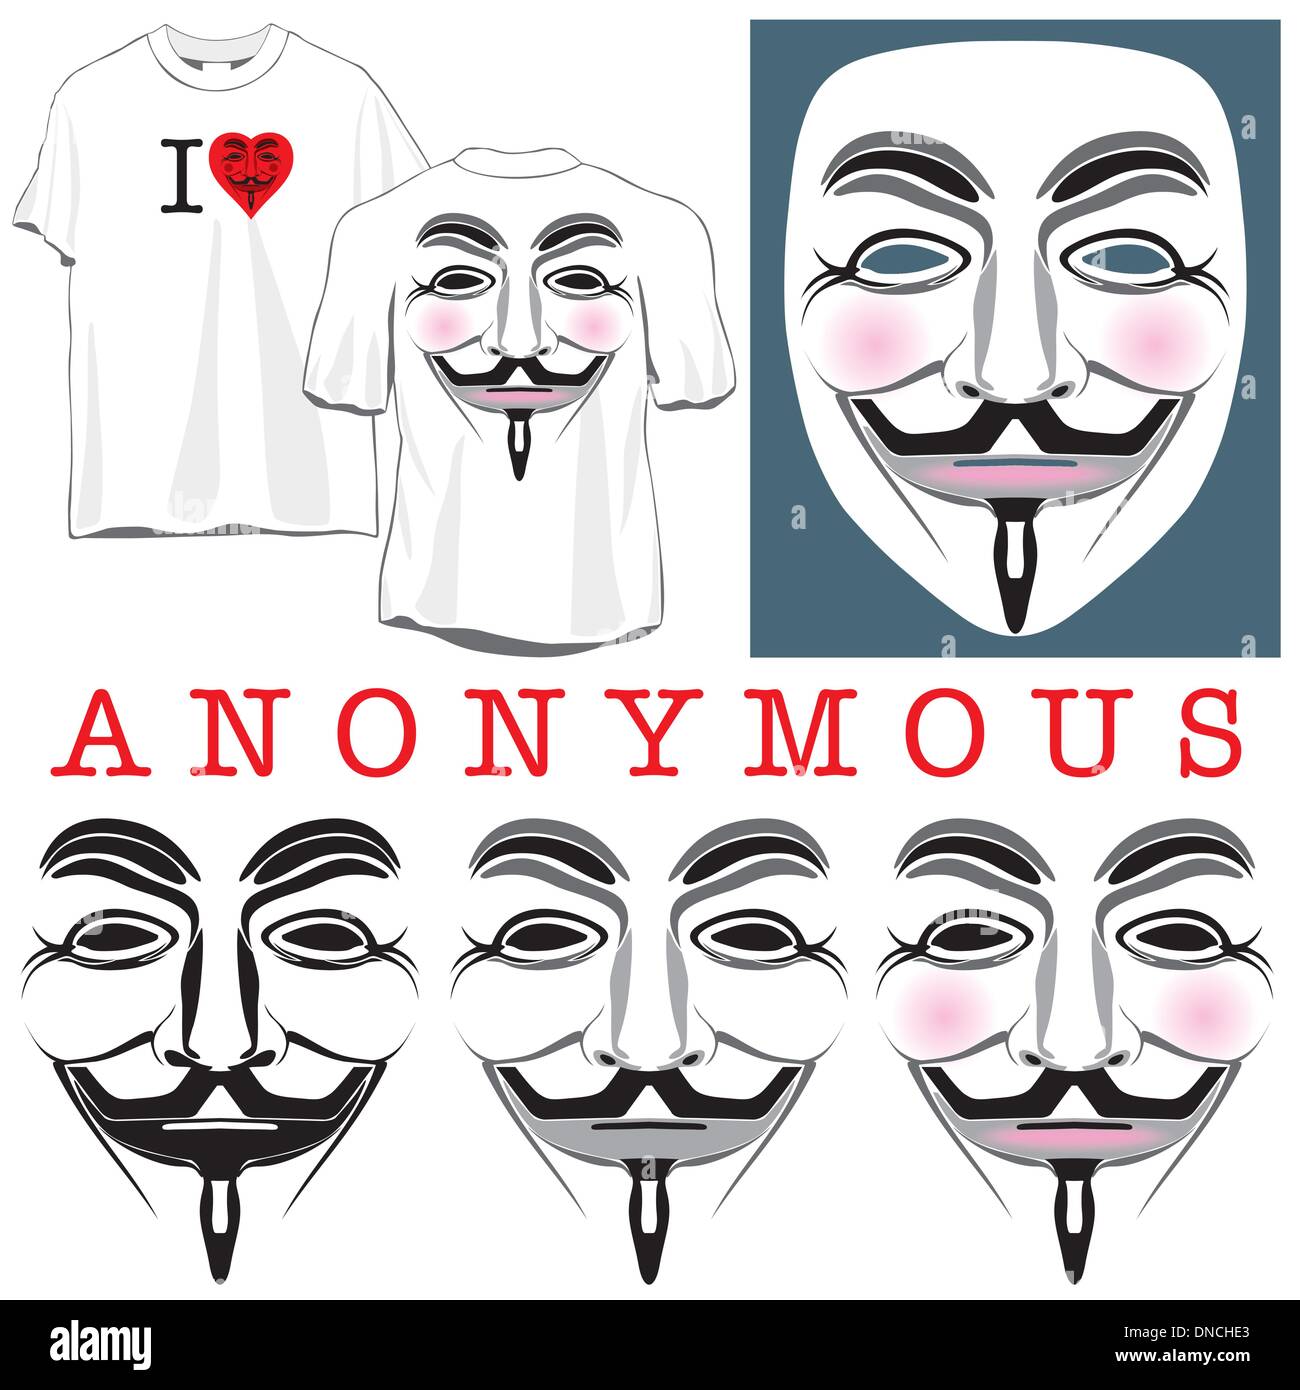 Anonymous Faces in Black, Color and T-shirts Stock Vector